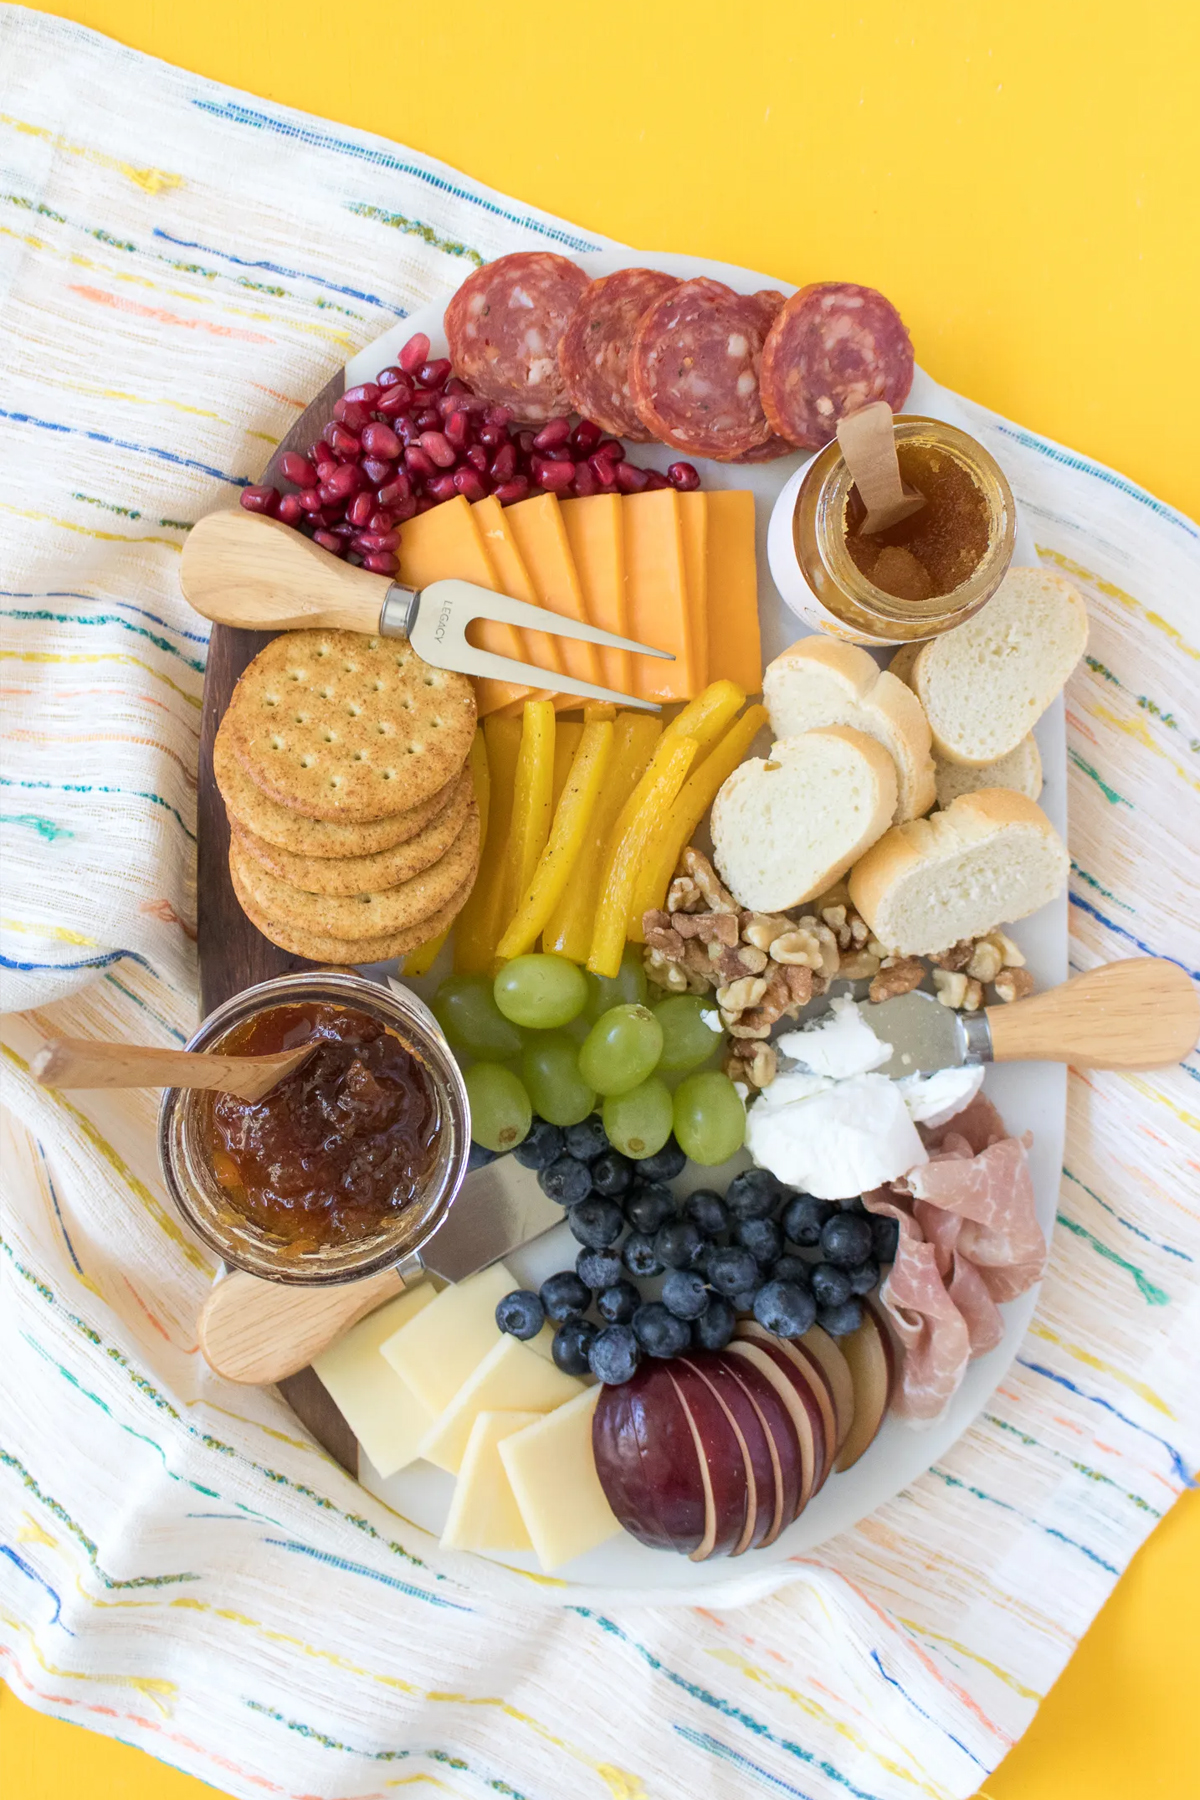 A small rainbow charcuterie board with breads, crackers, cheese, fruits, and jams from Sarah hearts. 